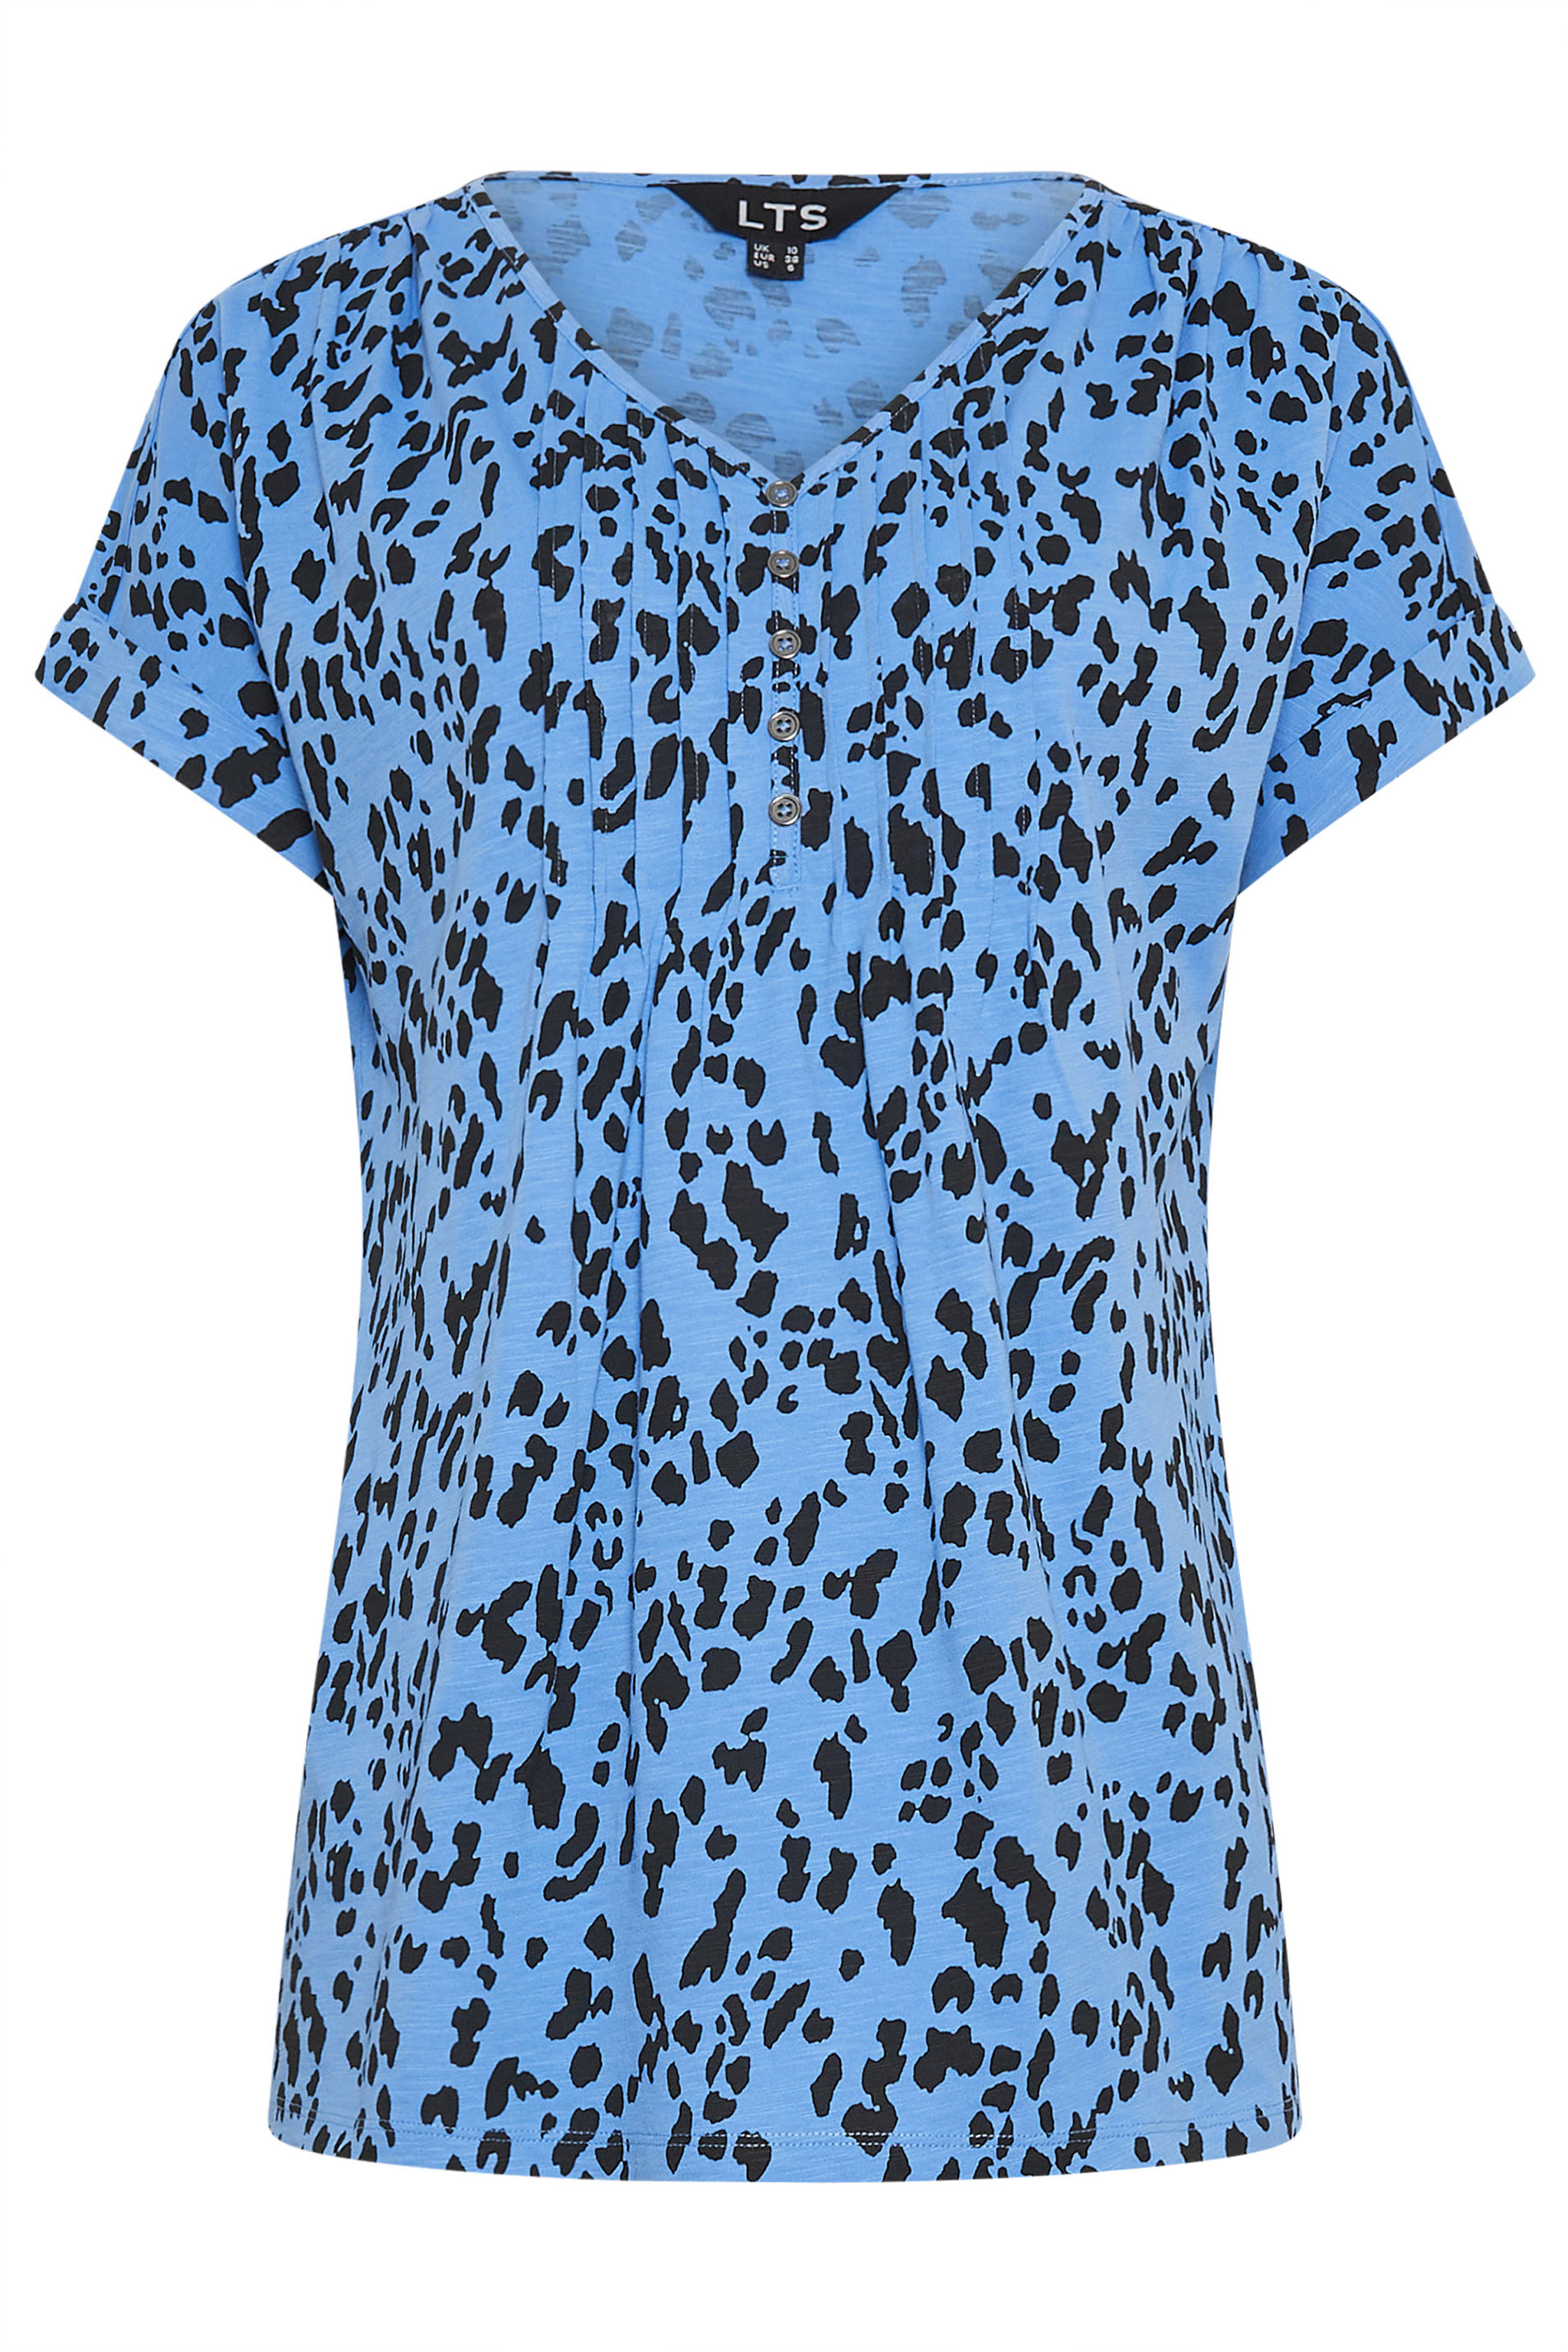 JWZUY Women Leopard Print Shirts Henley V Neck 3/4 Sleeve Blouse Plus Size  Comfy Fall Pullover Pleated Tunic Tops Blue XXXL 